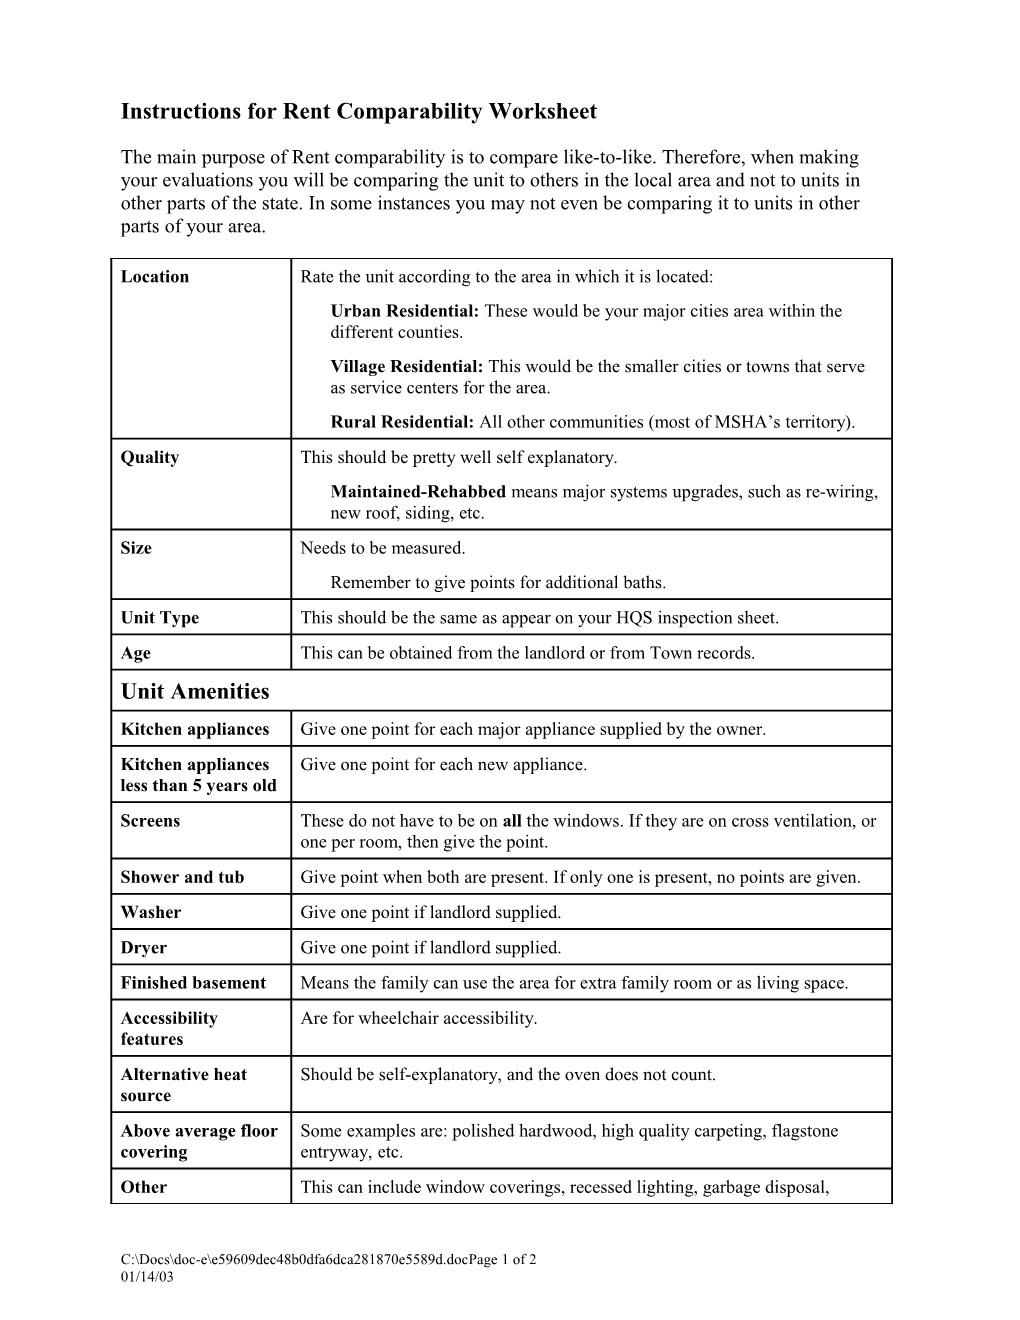 Instructions for Rent Comparability Worksheet